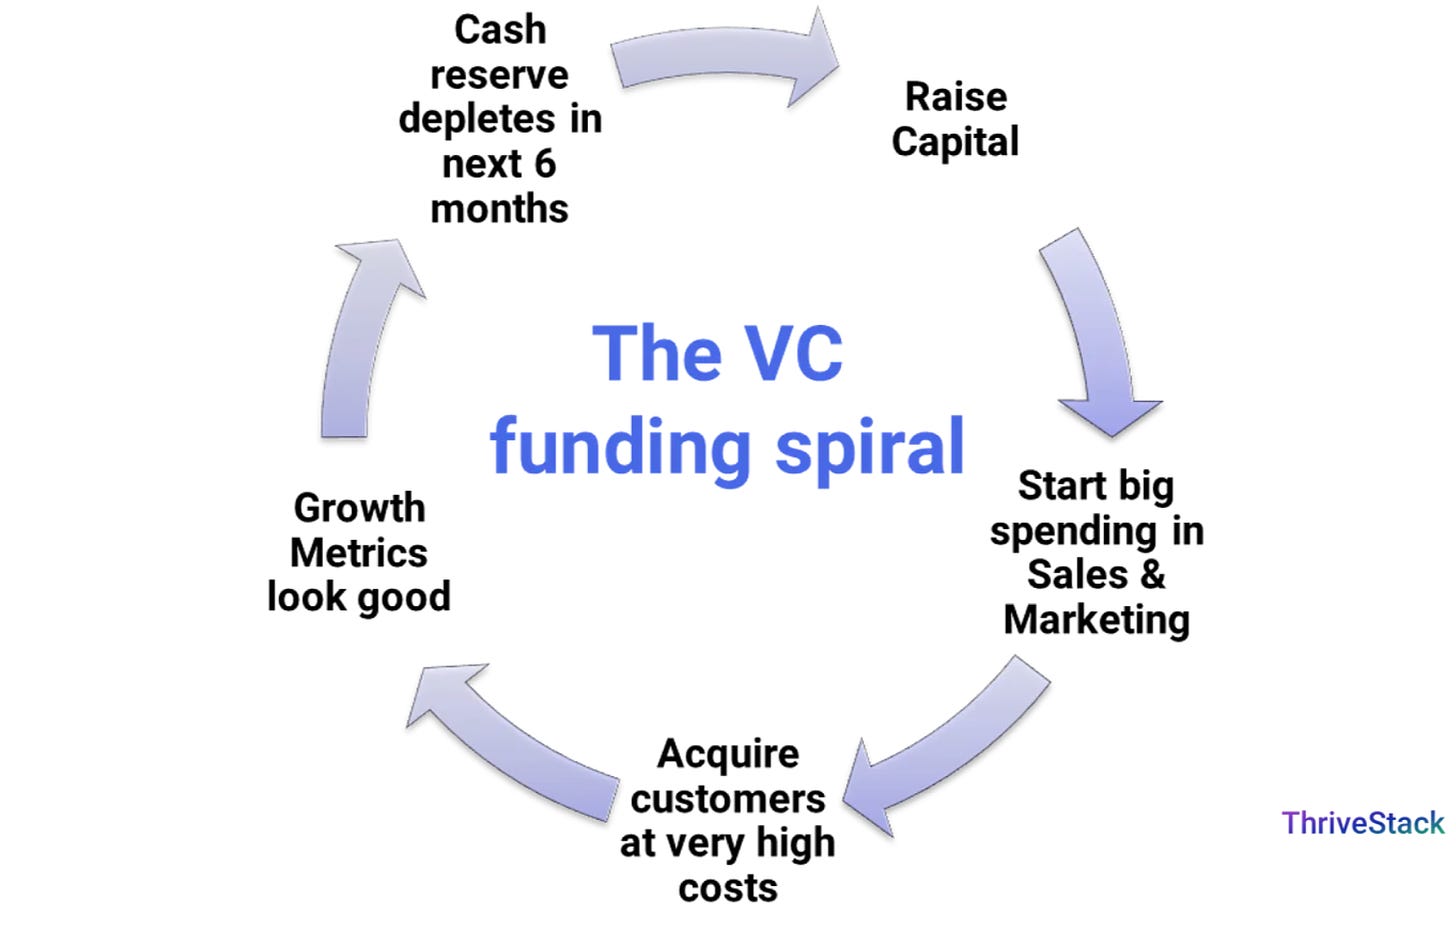 The VC funding cycle